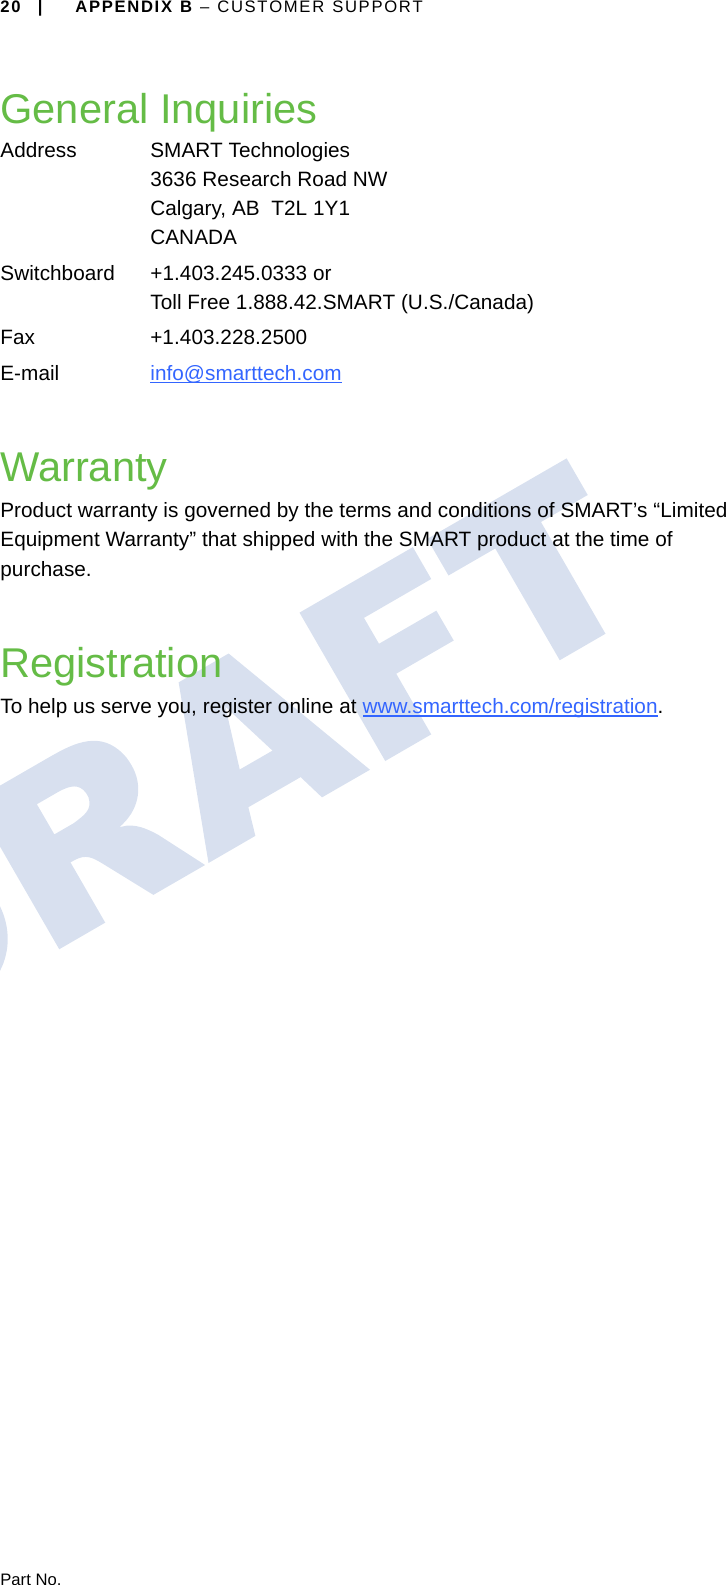 20 | APPENDIX B – CUSTOMER SUPPORTPart No.General InquiriesWarrantyProduct warranty is governed by the terms and conditions of SMART’s “Limited Equipment Warranty” that shipped with the SMART product at the time of purchase.RegistrationTo help us serve you, register online at www.smarttech.com/registration.Address SMART Technologies3636 Research Road NWCalgary, AB  T2L 1Y1CANADASwitchboard +1.403.245.0333 orToll Free 1.888.42.SMART (U.S./Canada)Fax +1.403.228.2500E-mail info@smarttech.com 